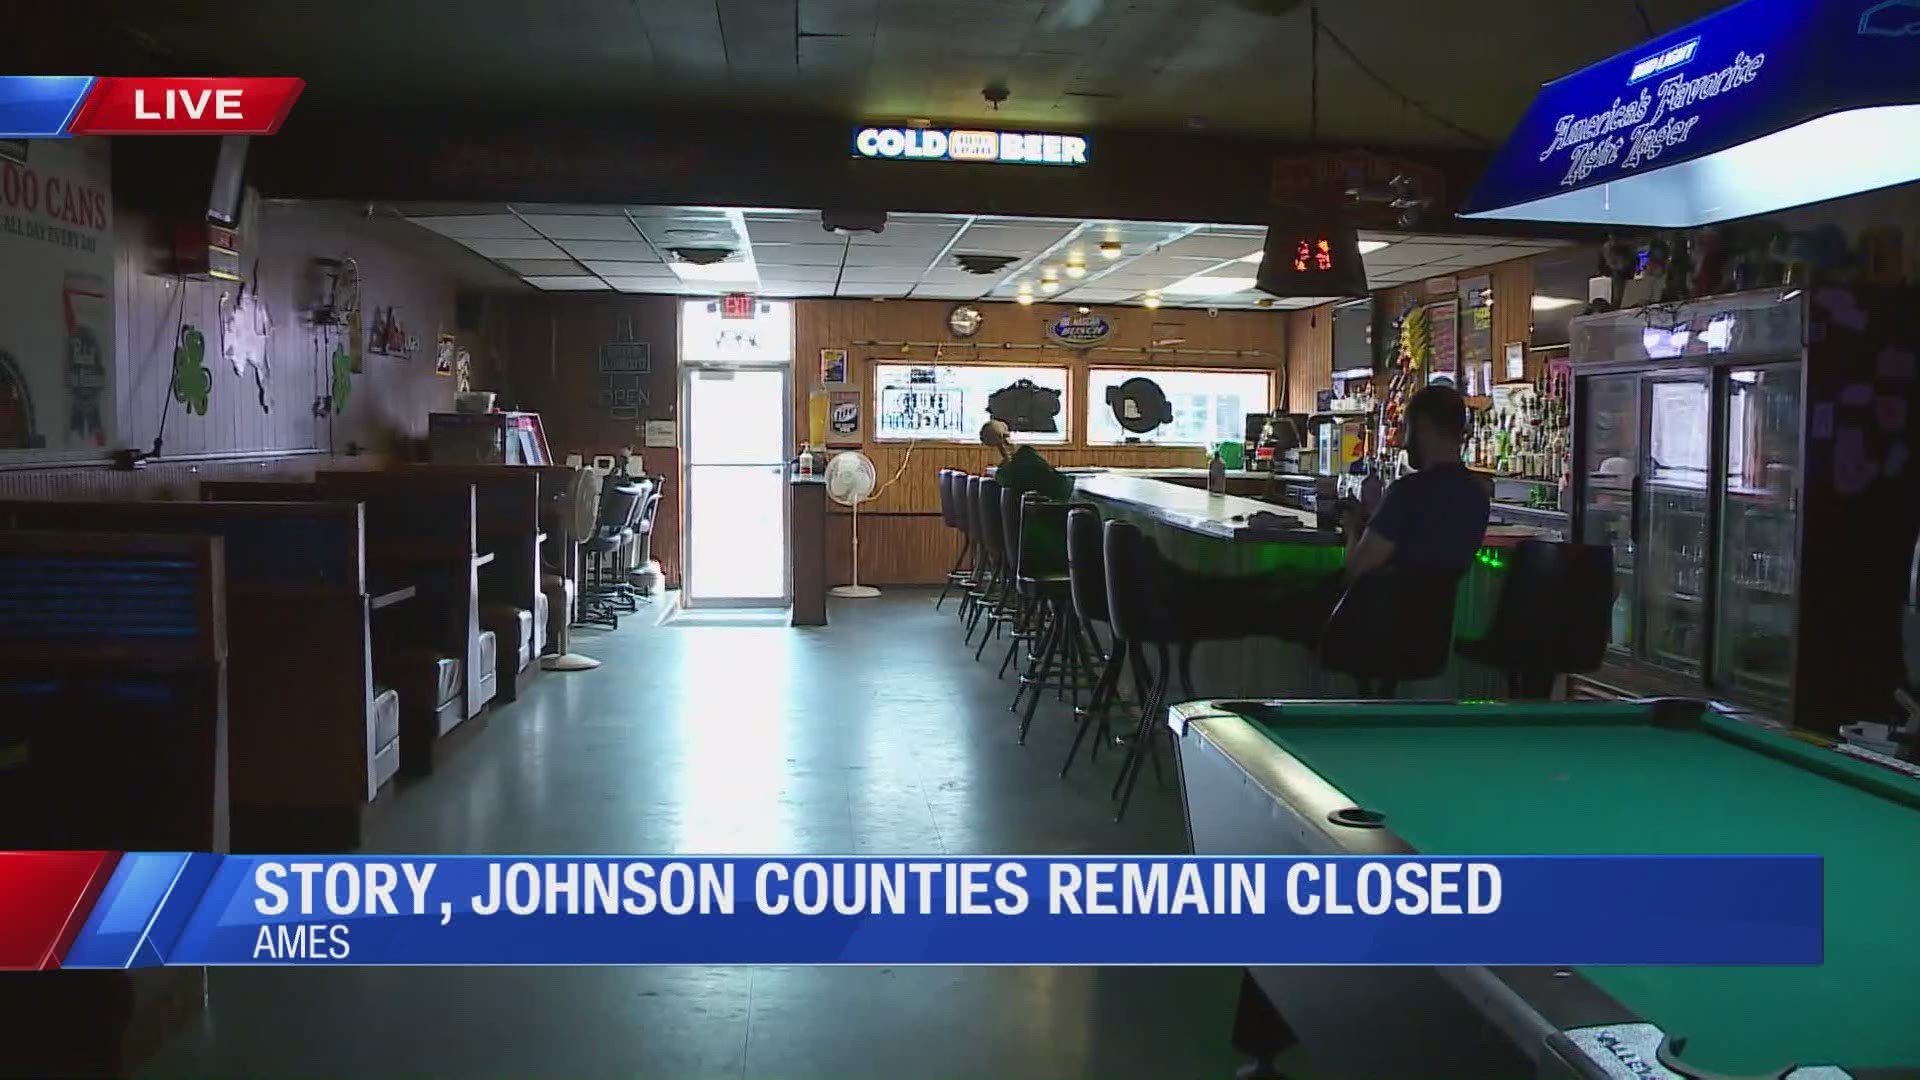 Businesses previously closed by Gov. Kim Reynolds reopened their doors Wednesday night, but two counties are still ordered to remain closed.